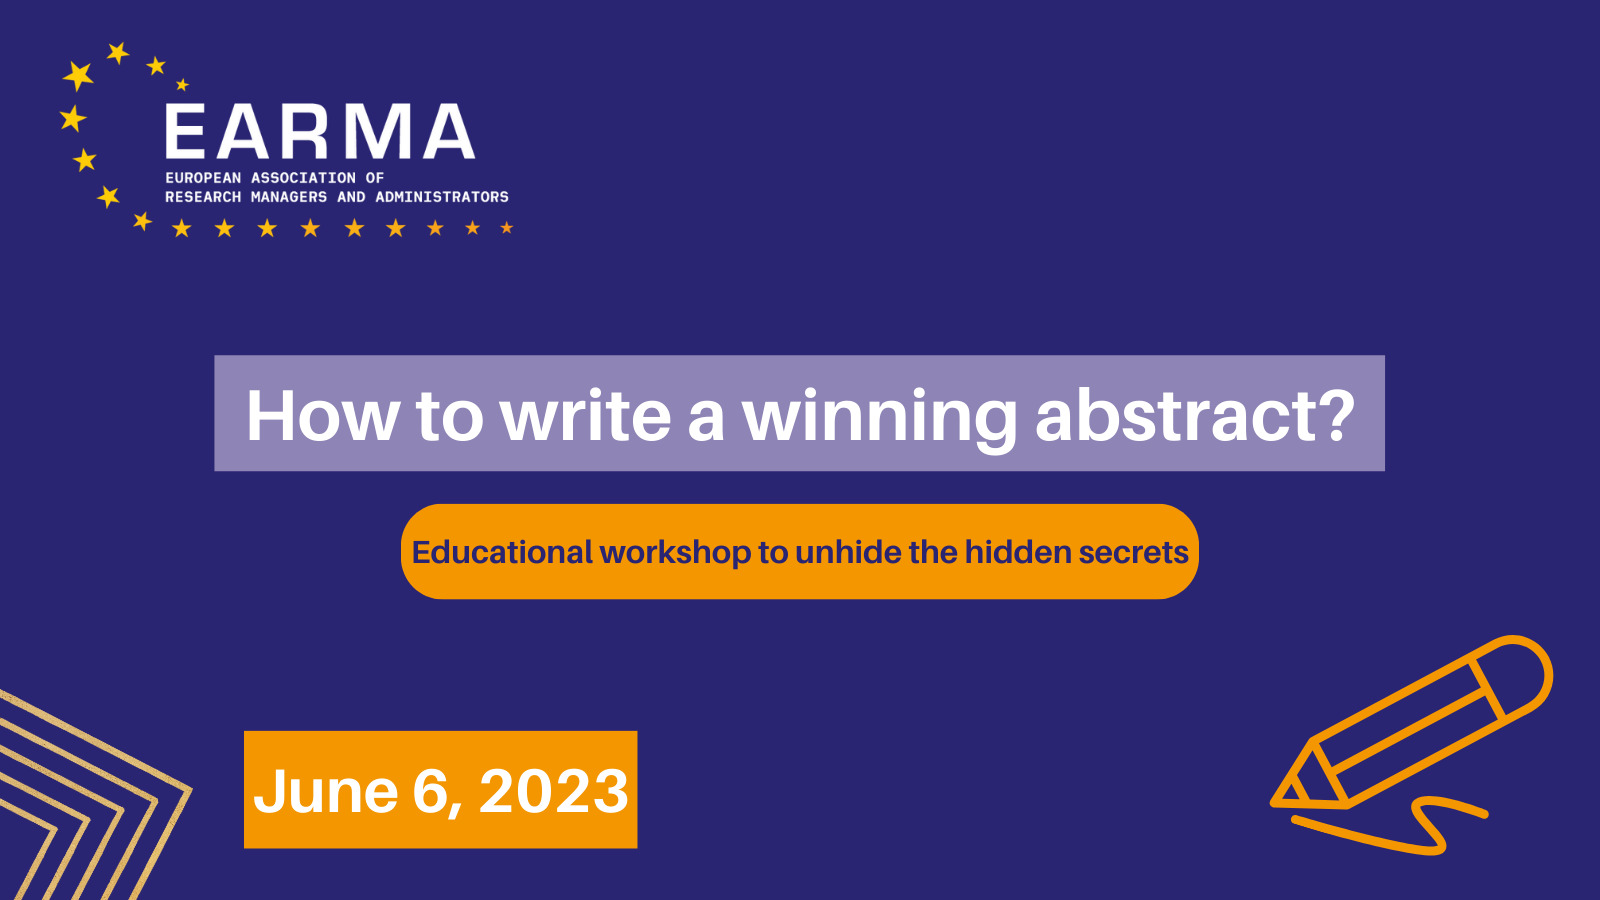 How to write a winning abstract?